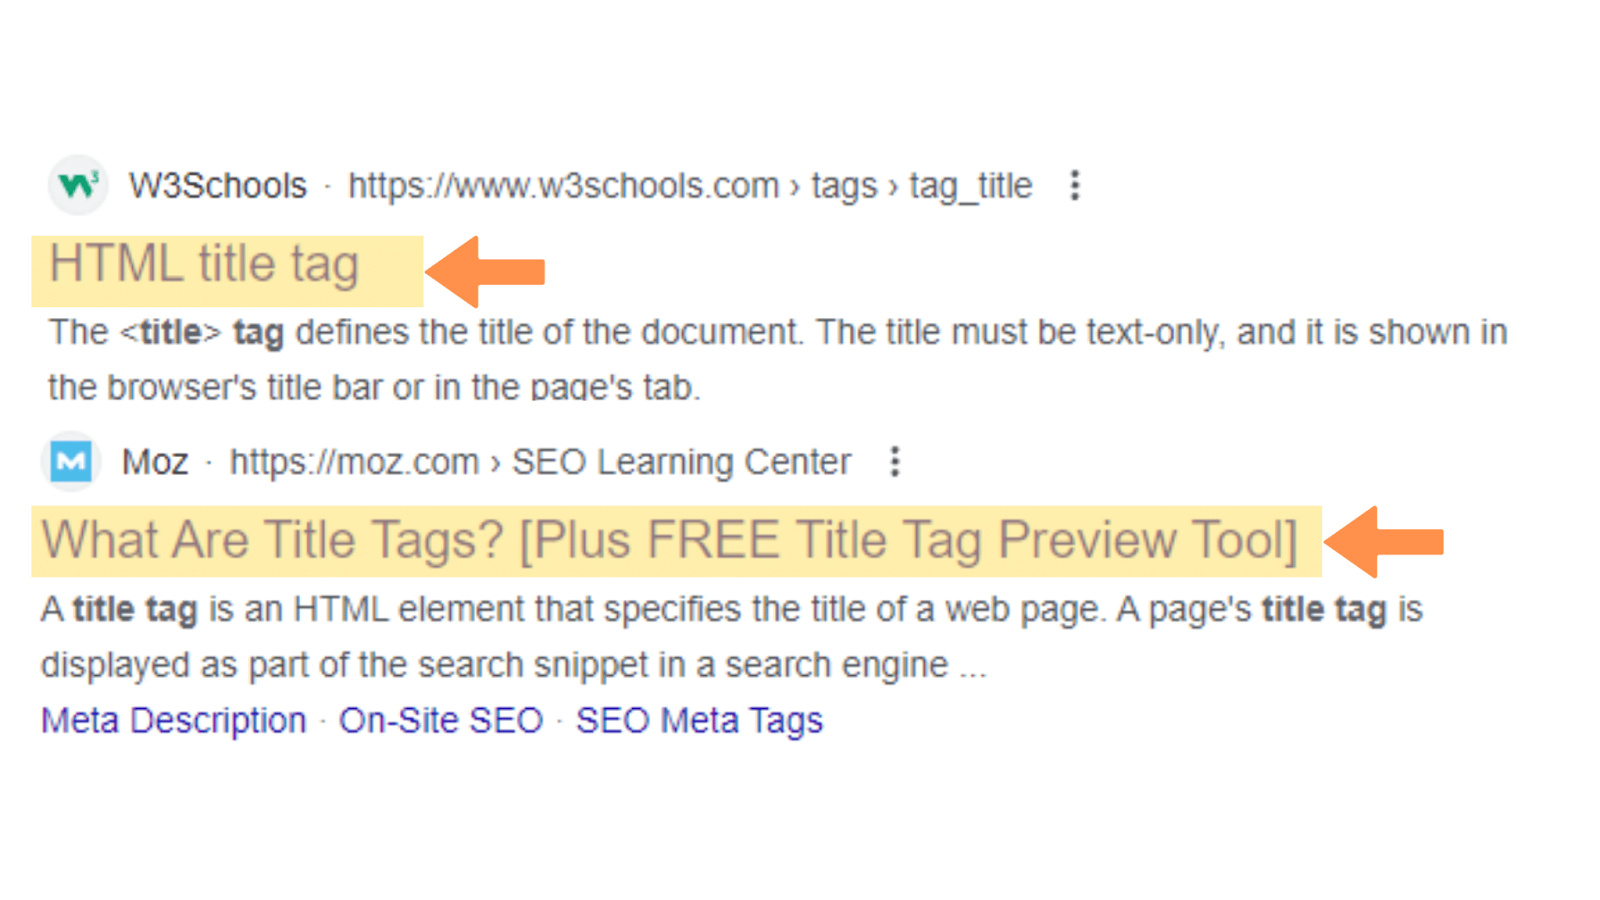 effective title tags,best practices for title tags,Why Do Title Tags Matter for On-Page SEO,Write Effective Title Tags for On-Page SEO,character limit,branding,relevant search queries,keyword placement,meta title tags